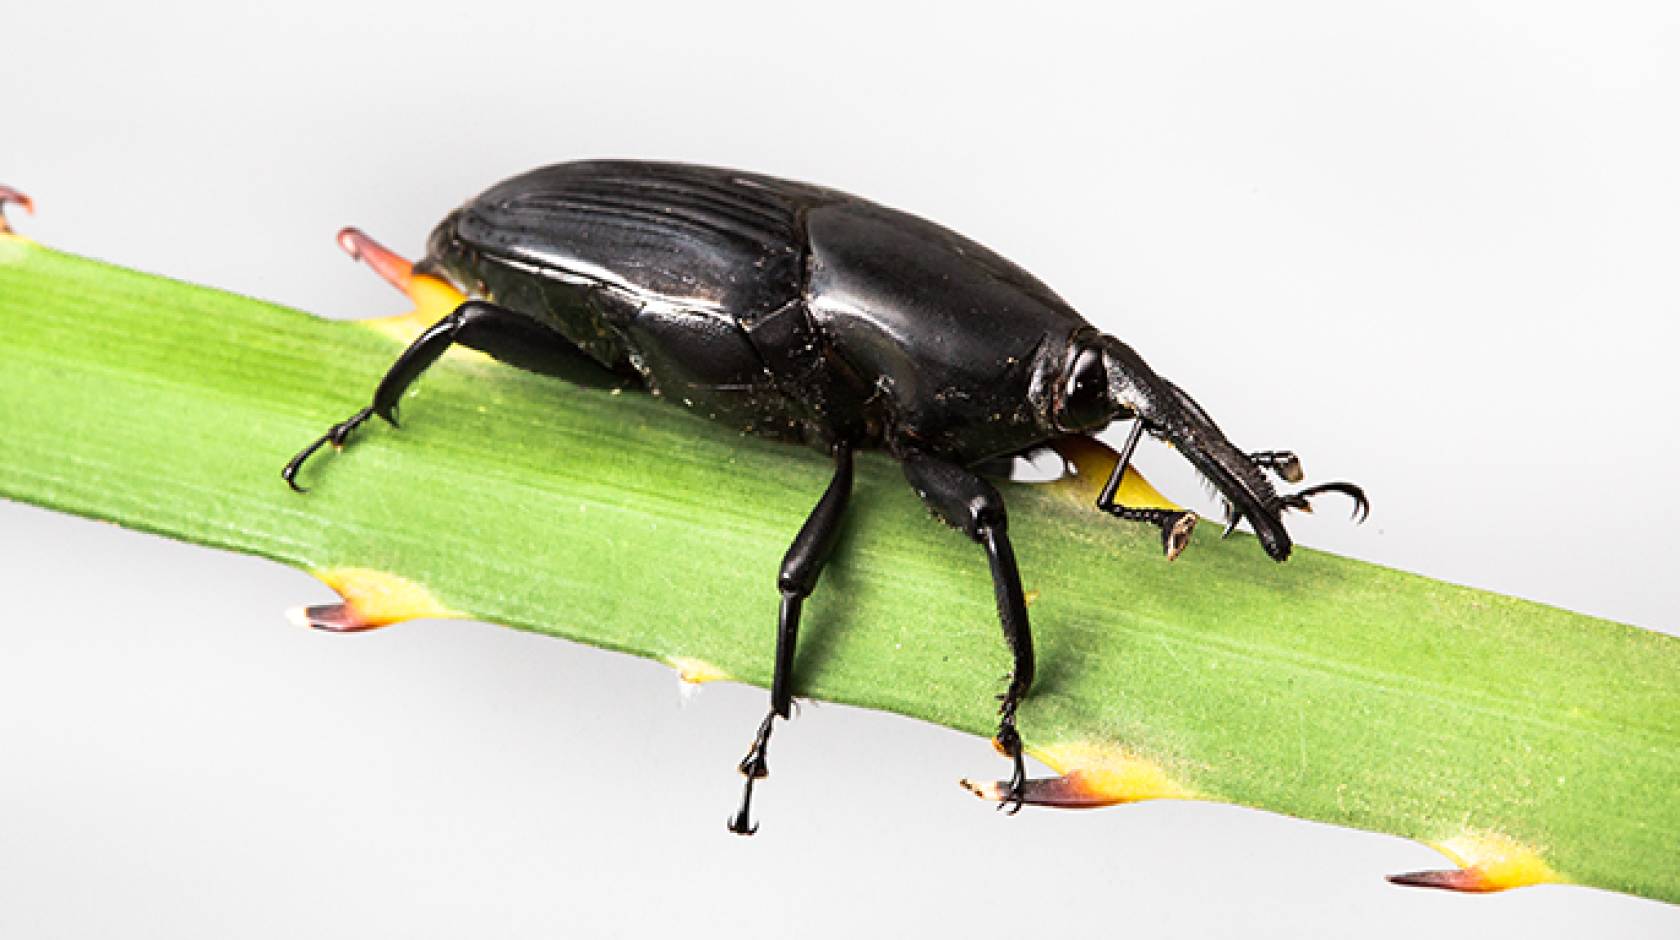 The South American palm Weevil has recently spread to San Diego County.